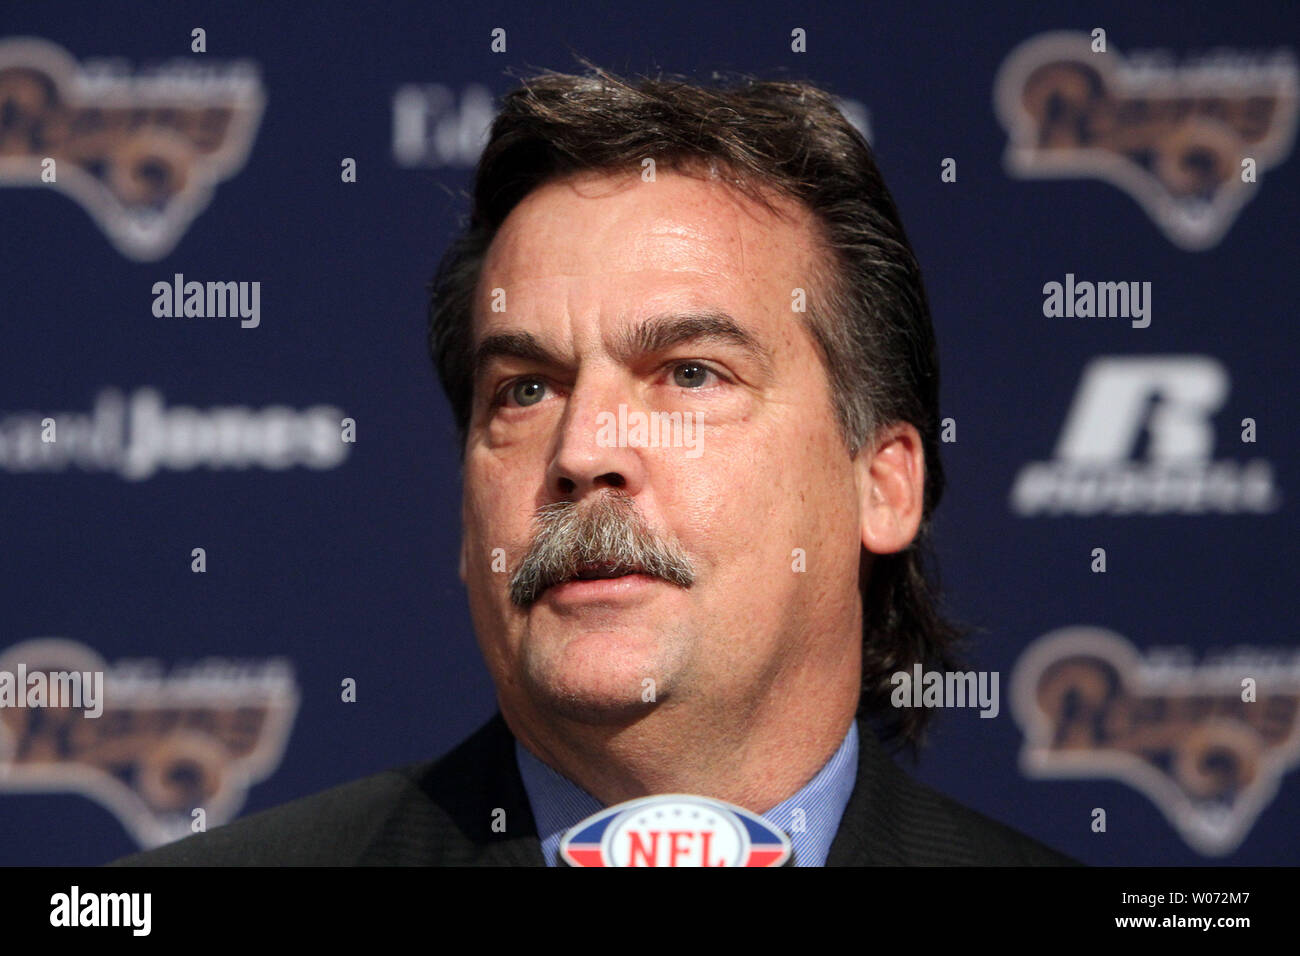 St. Louis Rams new head coach Jeff Fisher answers a question after being introduced at the team's practice facility in Earth City, Missouri on January 17, 2012.   UPI/Bill Greenblatt Stock Photo